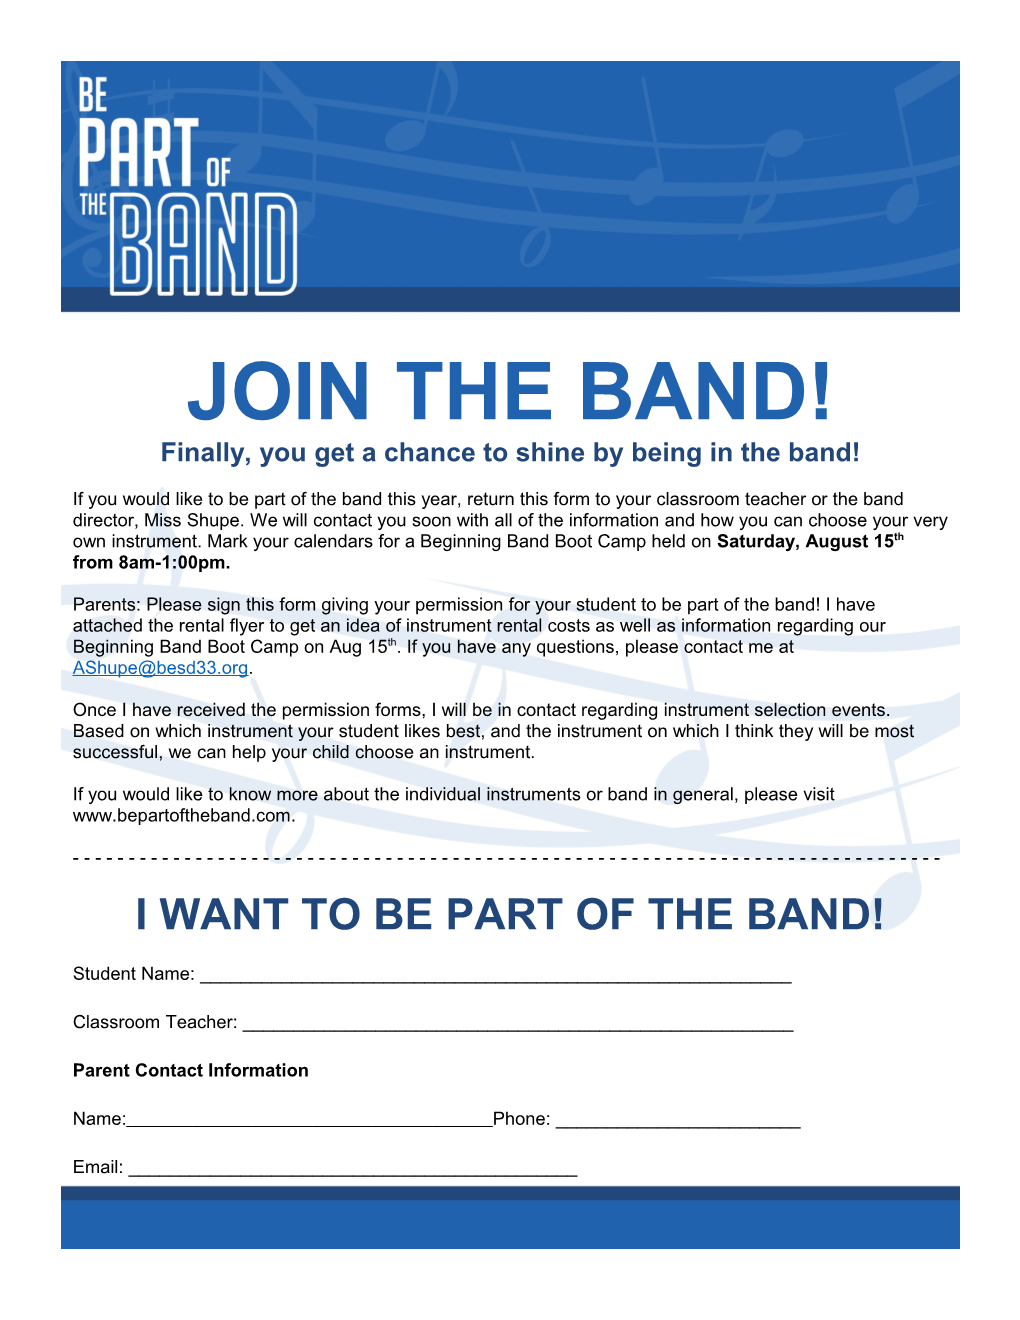 Finally, You Get a Chance to Shine by Being in the Band!